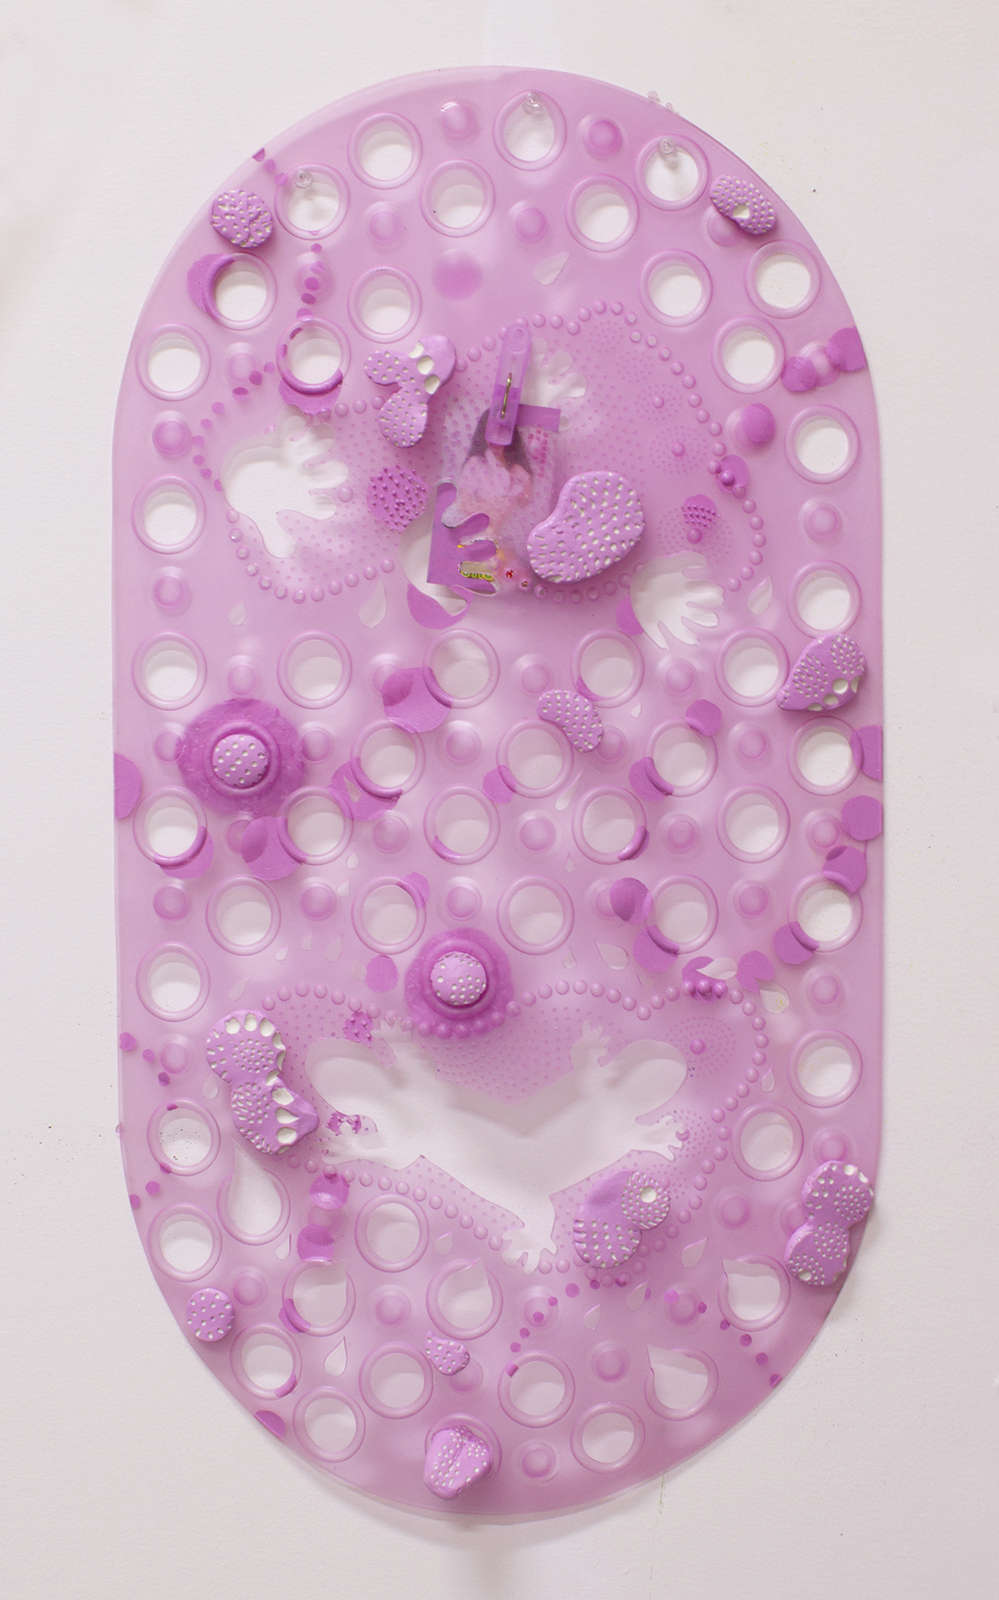 Lavender plastic bath mat hanging on the wall, with hand-like and abstract shapes cut out of it, and blobs of polymer clay painted to match the color of the mat attached to the surface.